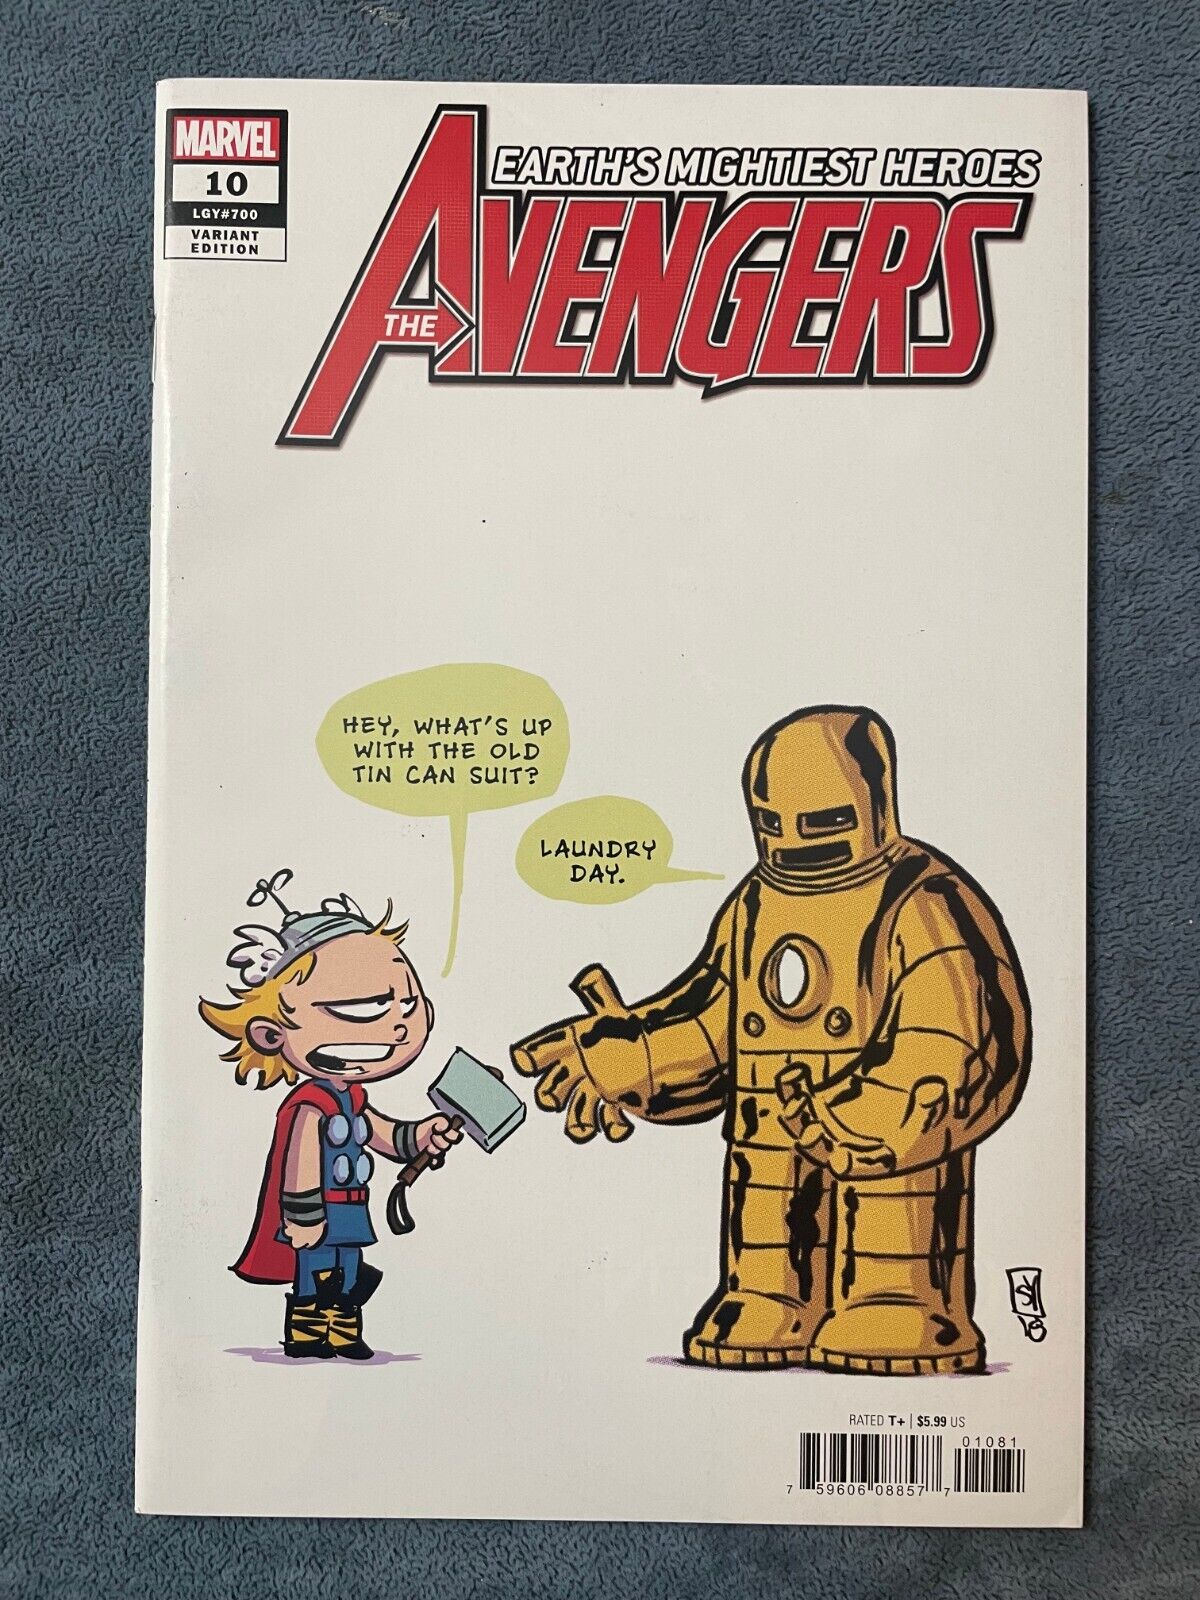 Avengers #10 2018 Marvel Comic Book Skottie Young Variant LGY 700 NM